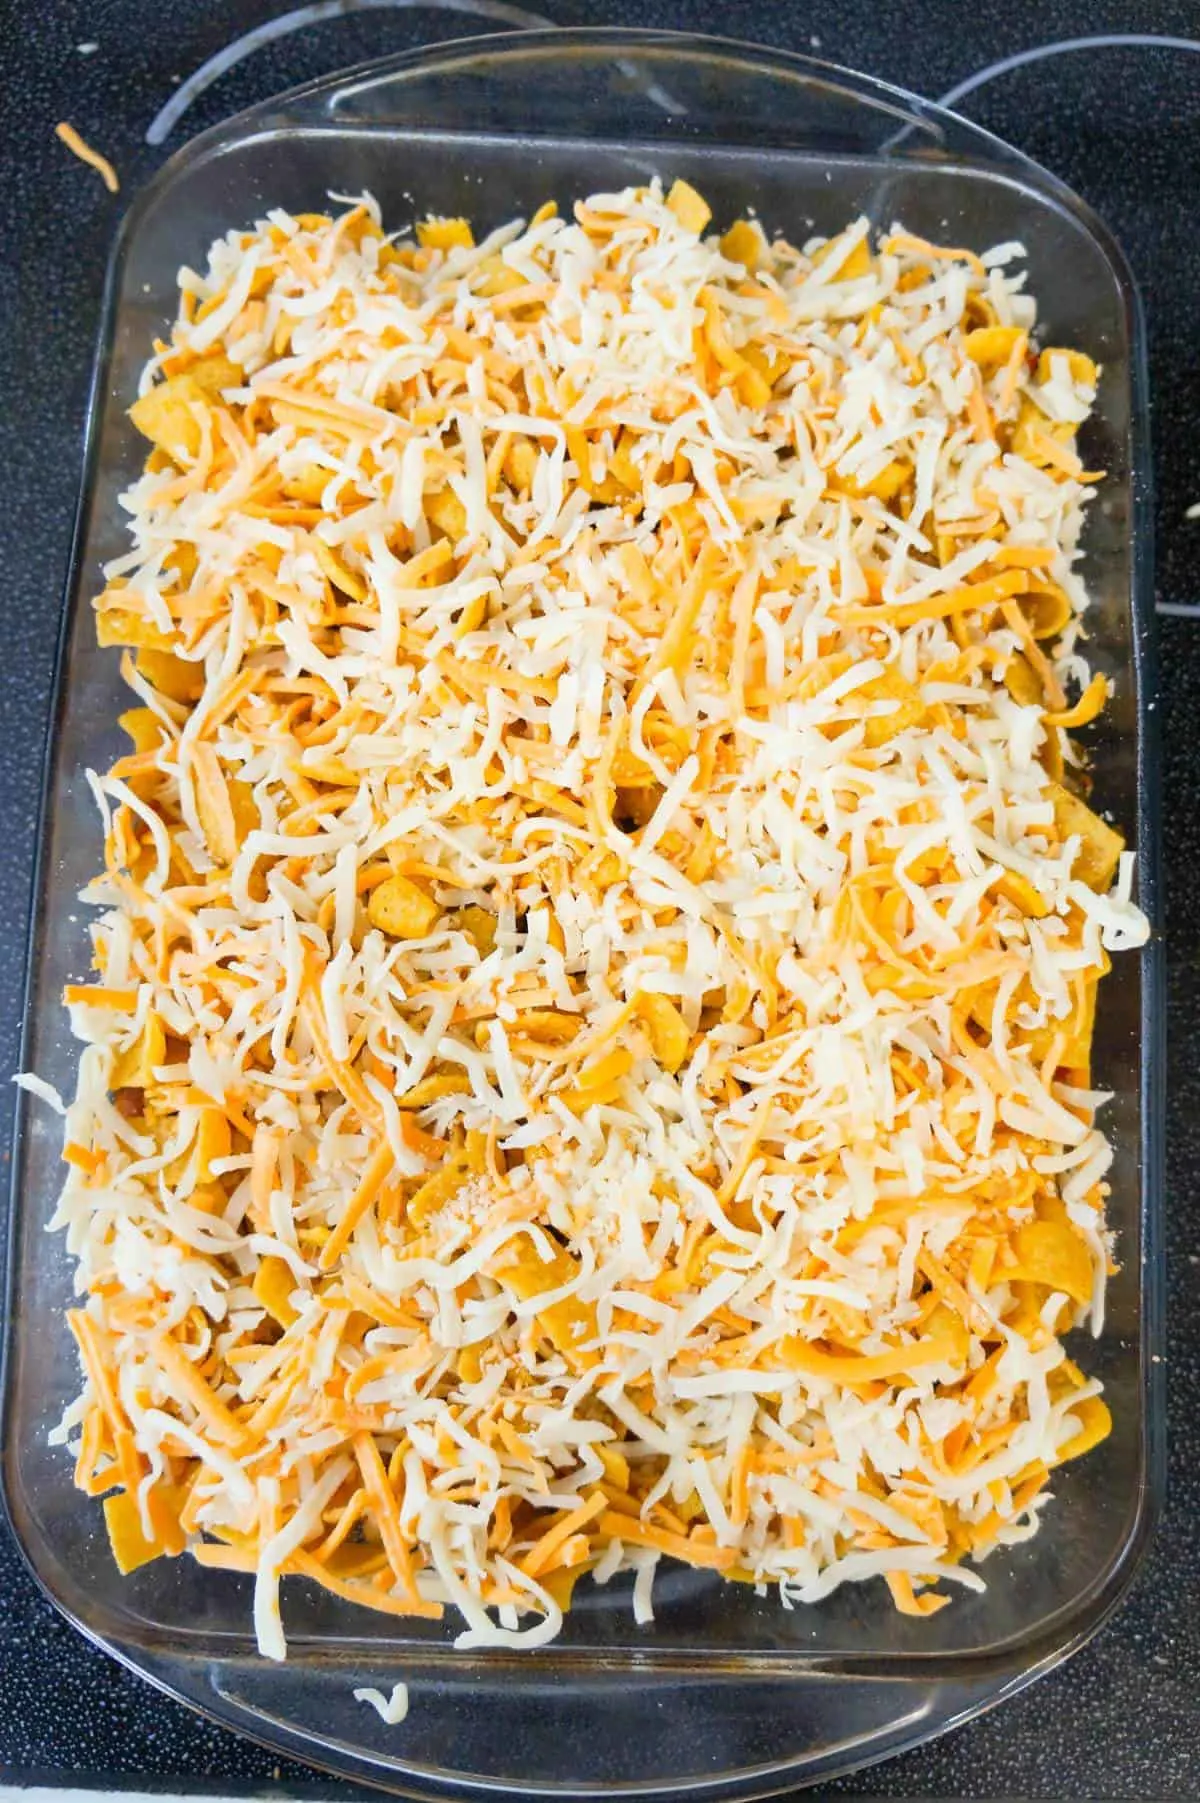 shredded mozzarella and cheddar cheese on top of frito pie